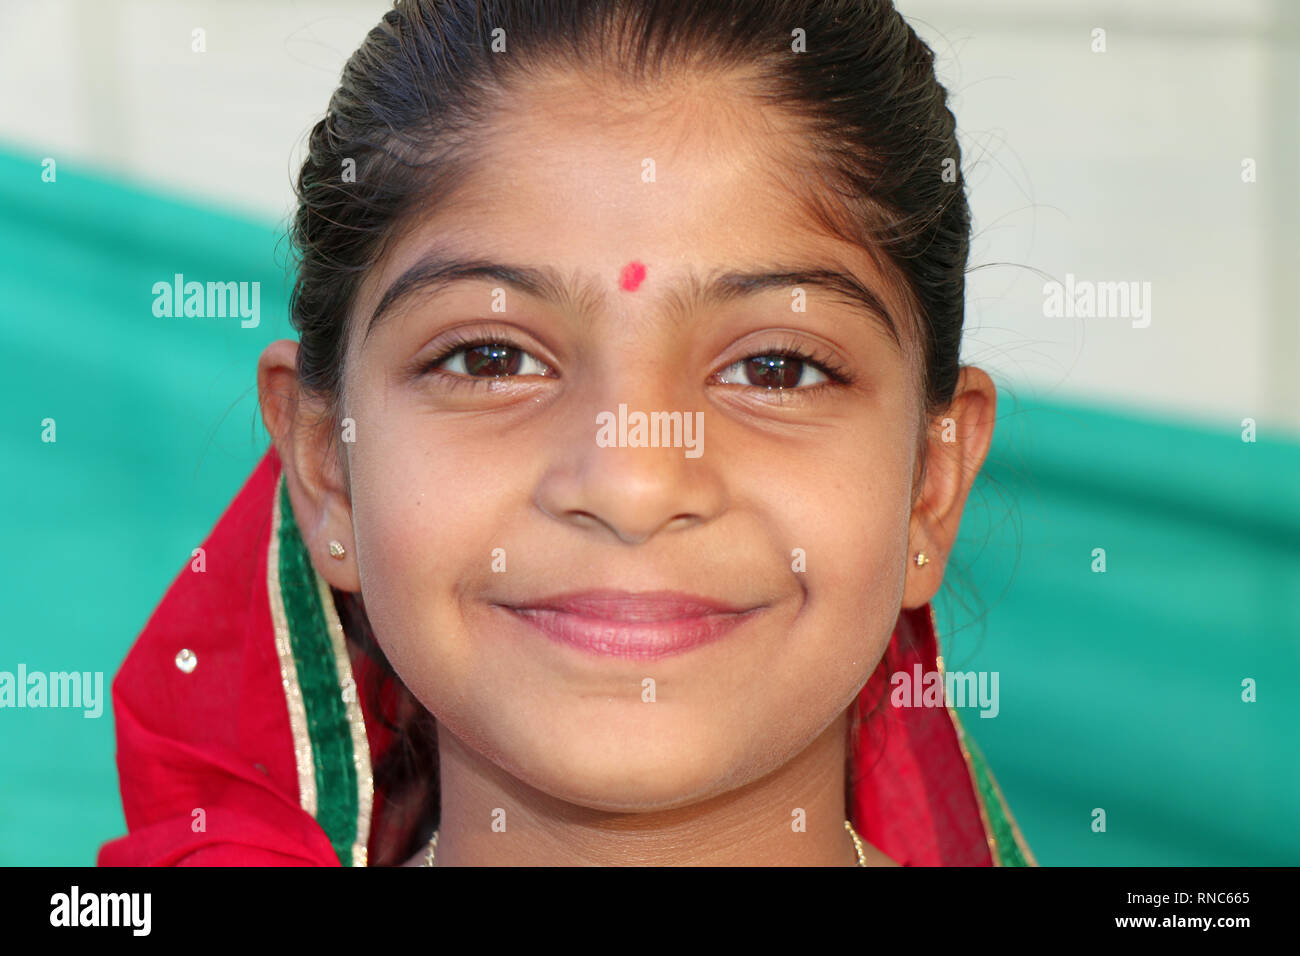 Indian cute girl with smiling face. This girl is looking very